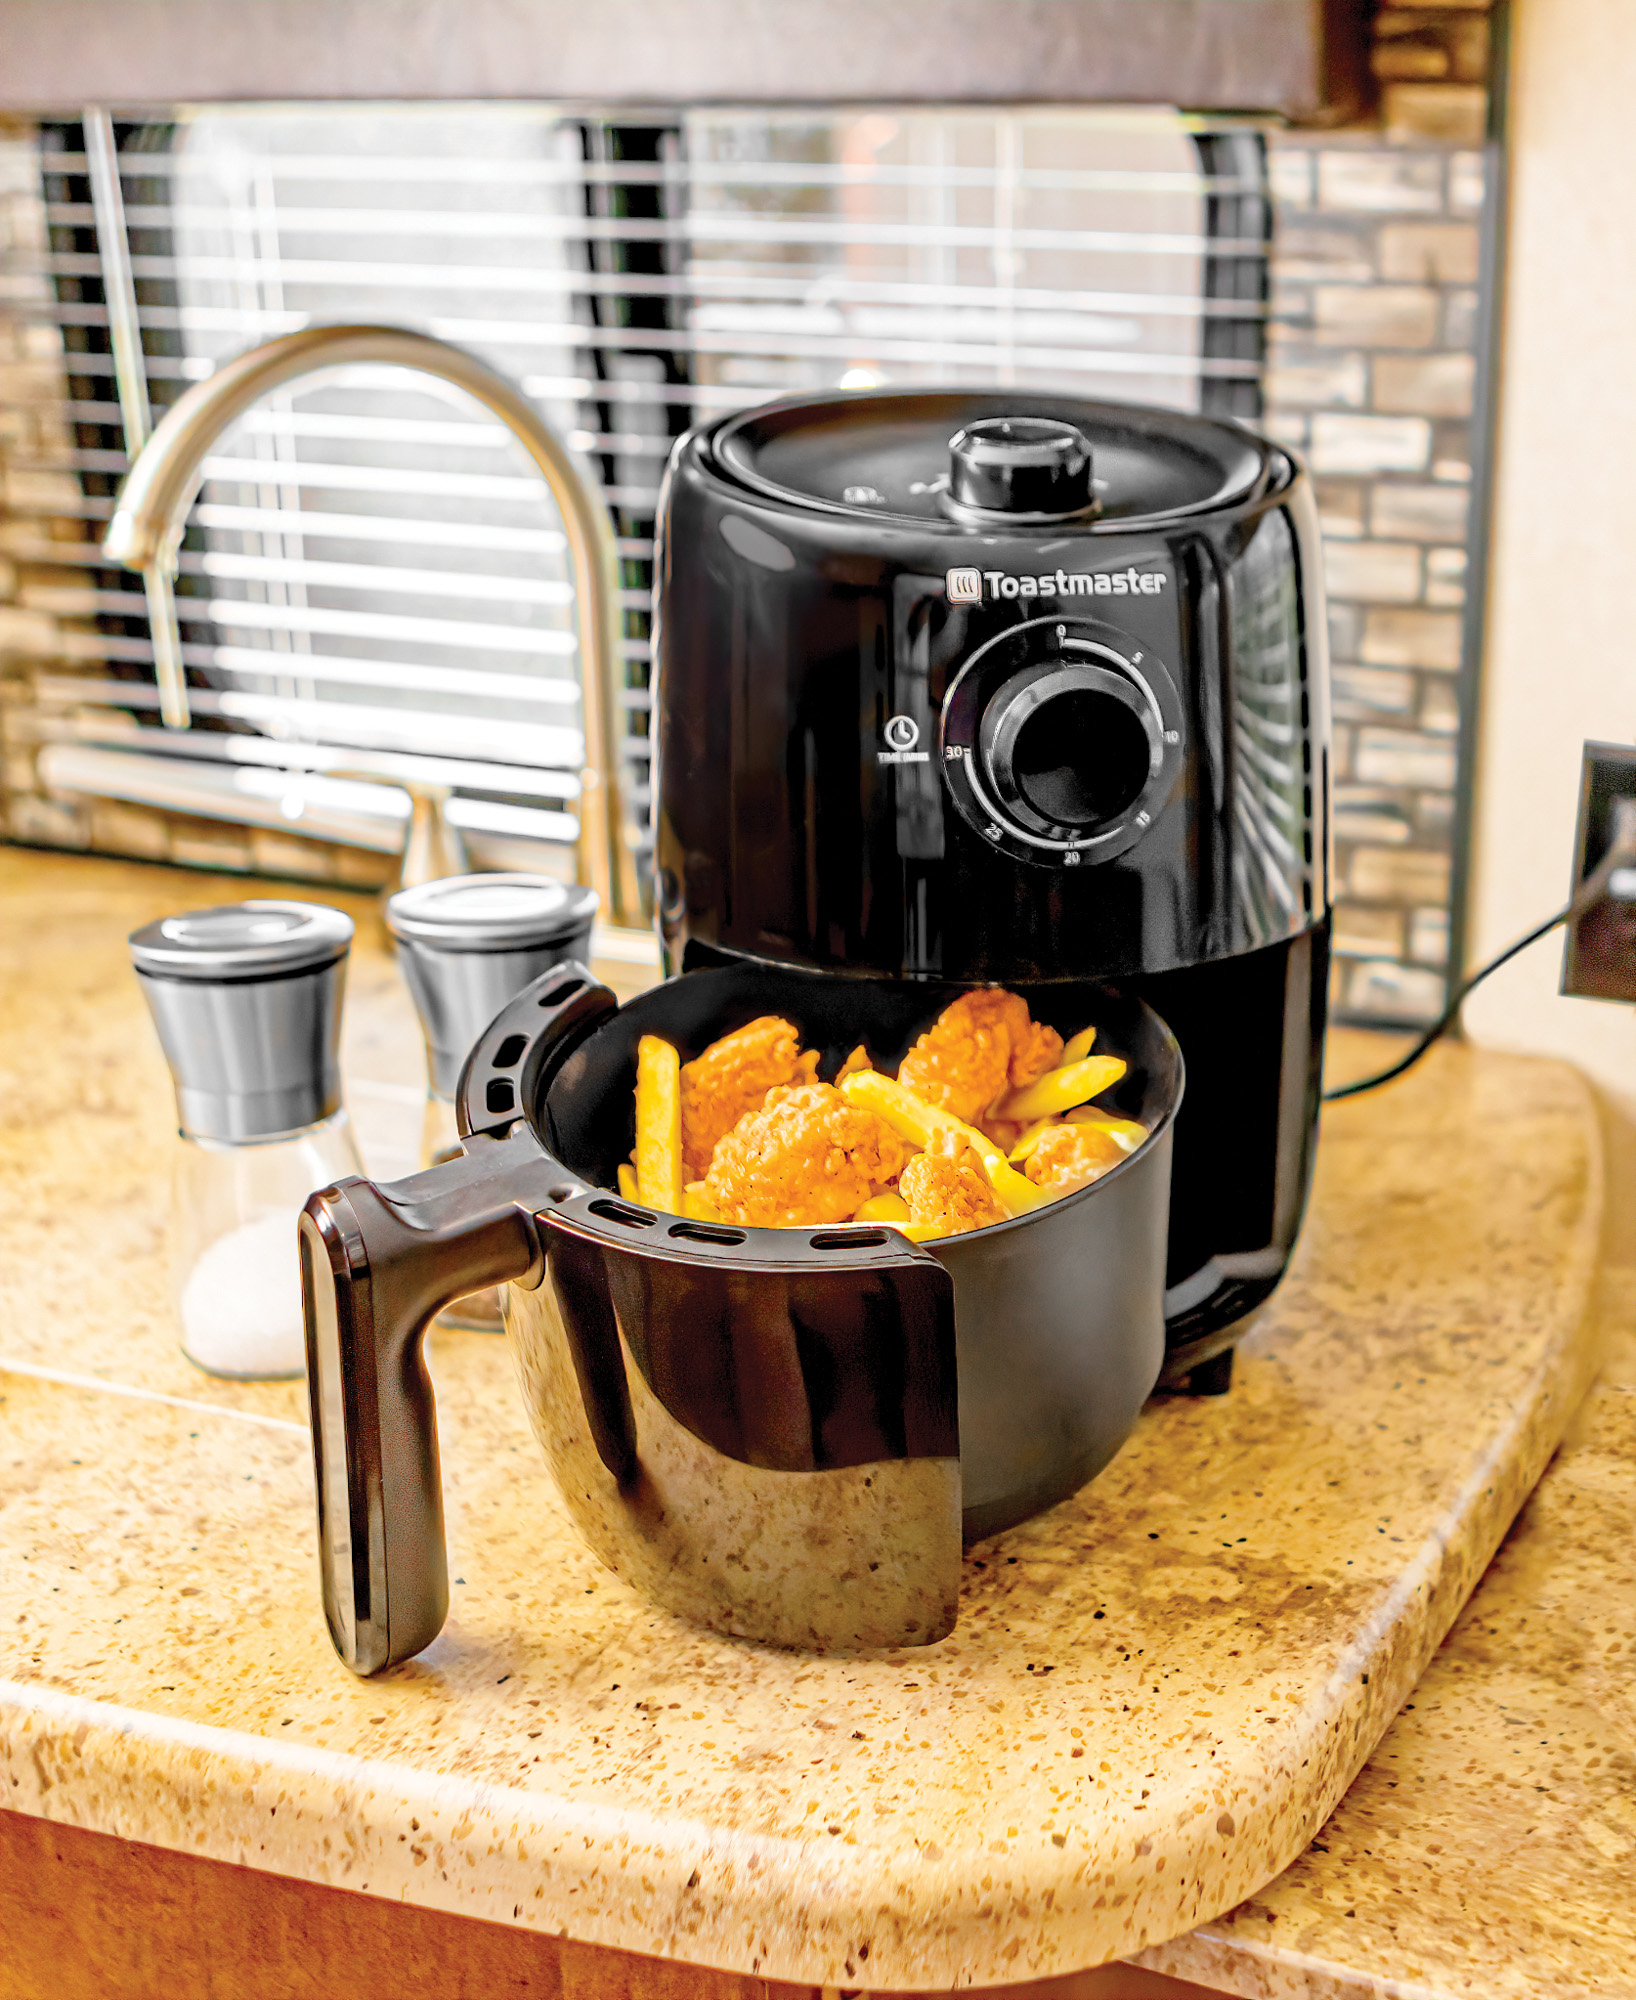 The Toastmaster Air Fryer Is Perfect for the RV